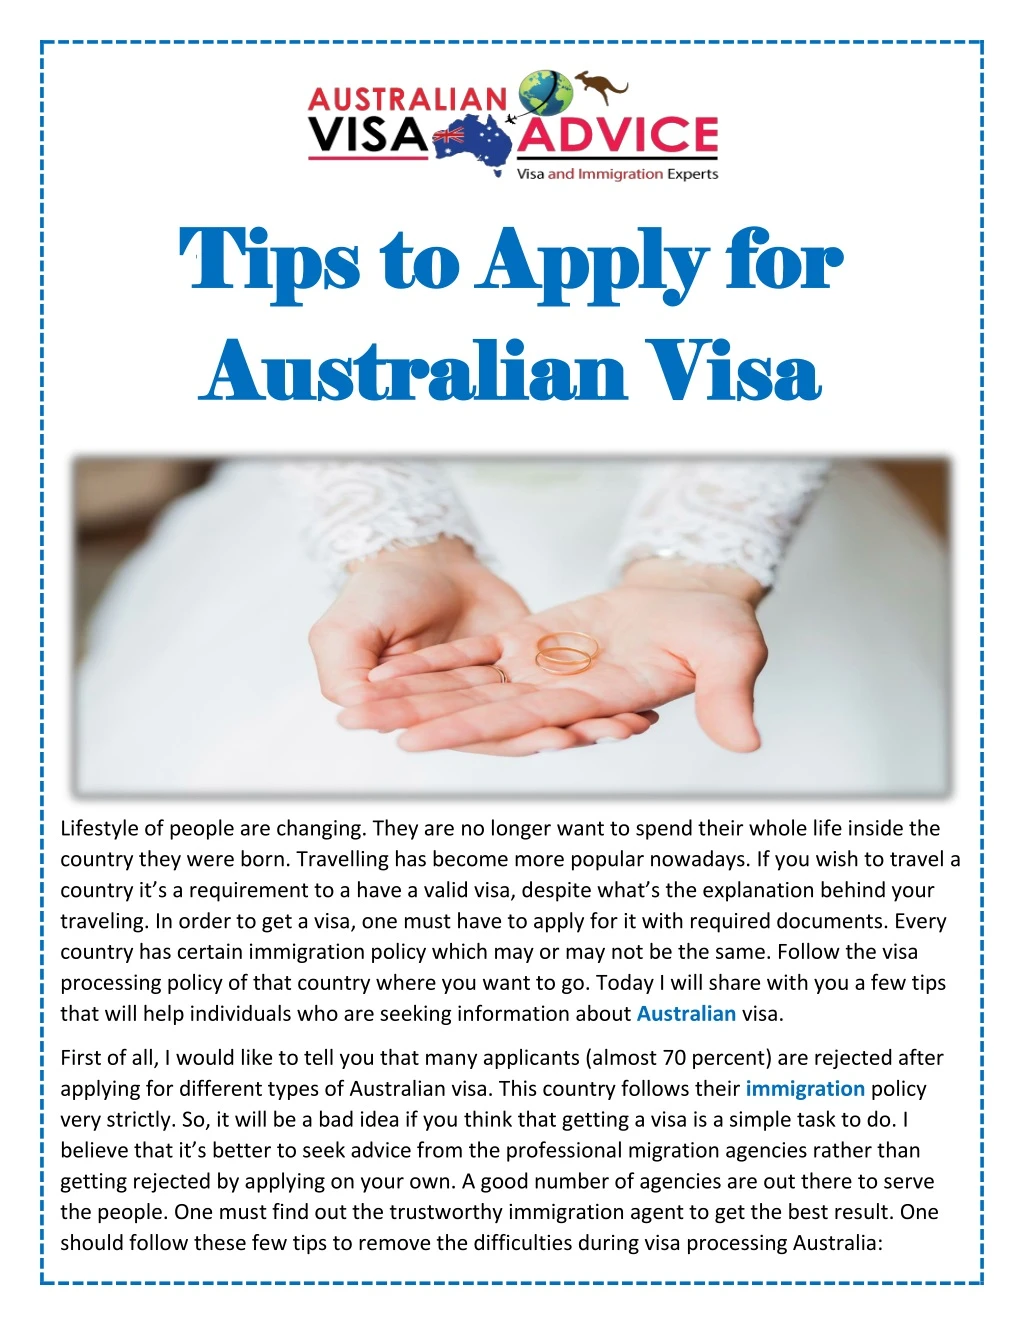 tips to apply for tips to apply for australian